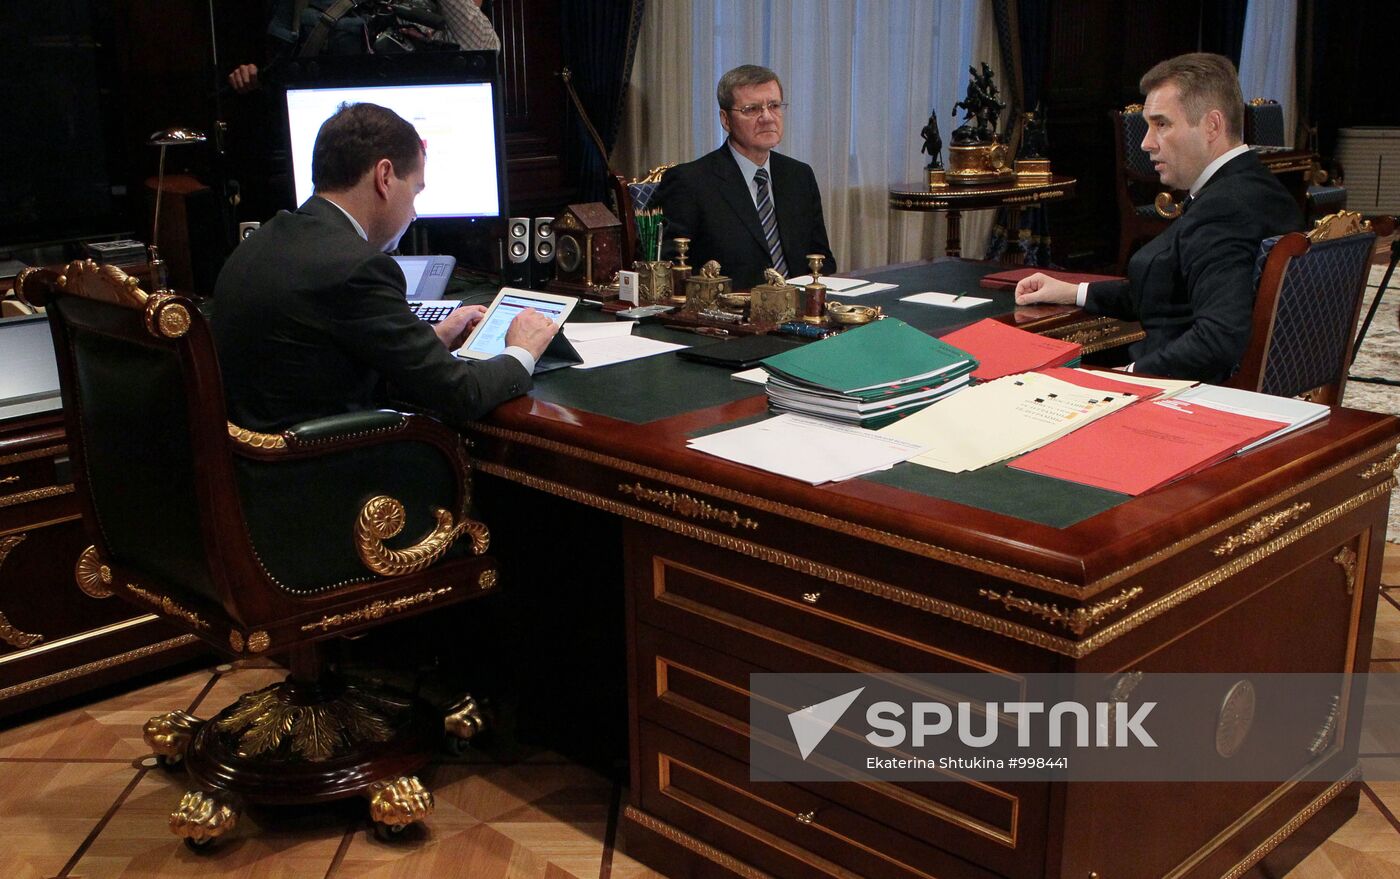 Dmitry Medvedev meets with Pavel Astakhov and Yuri Chaika